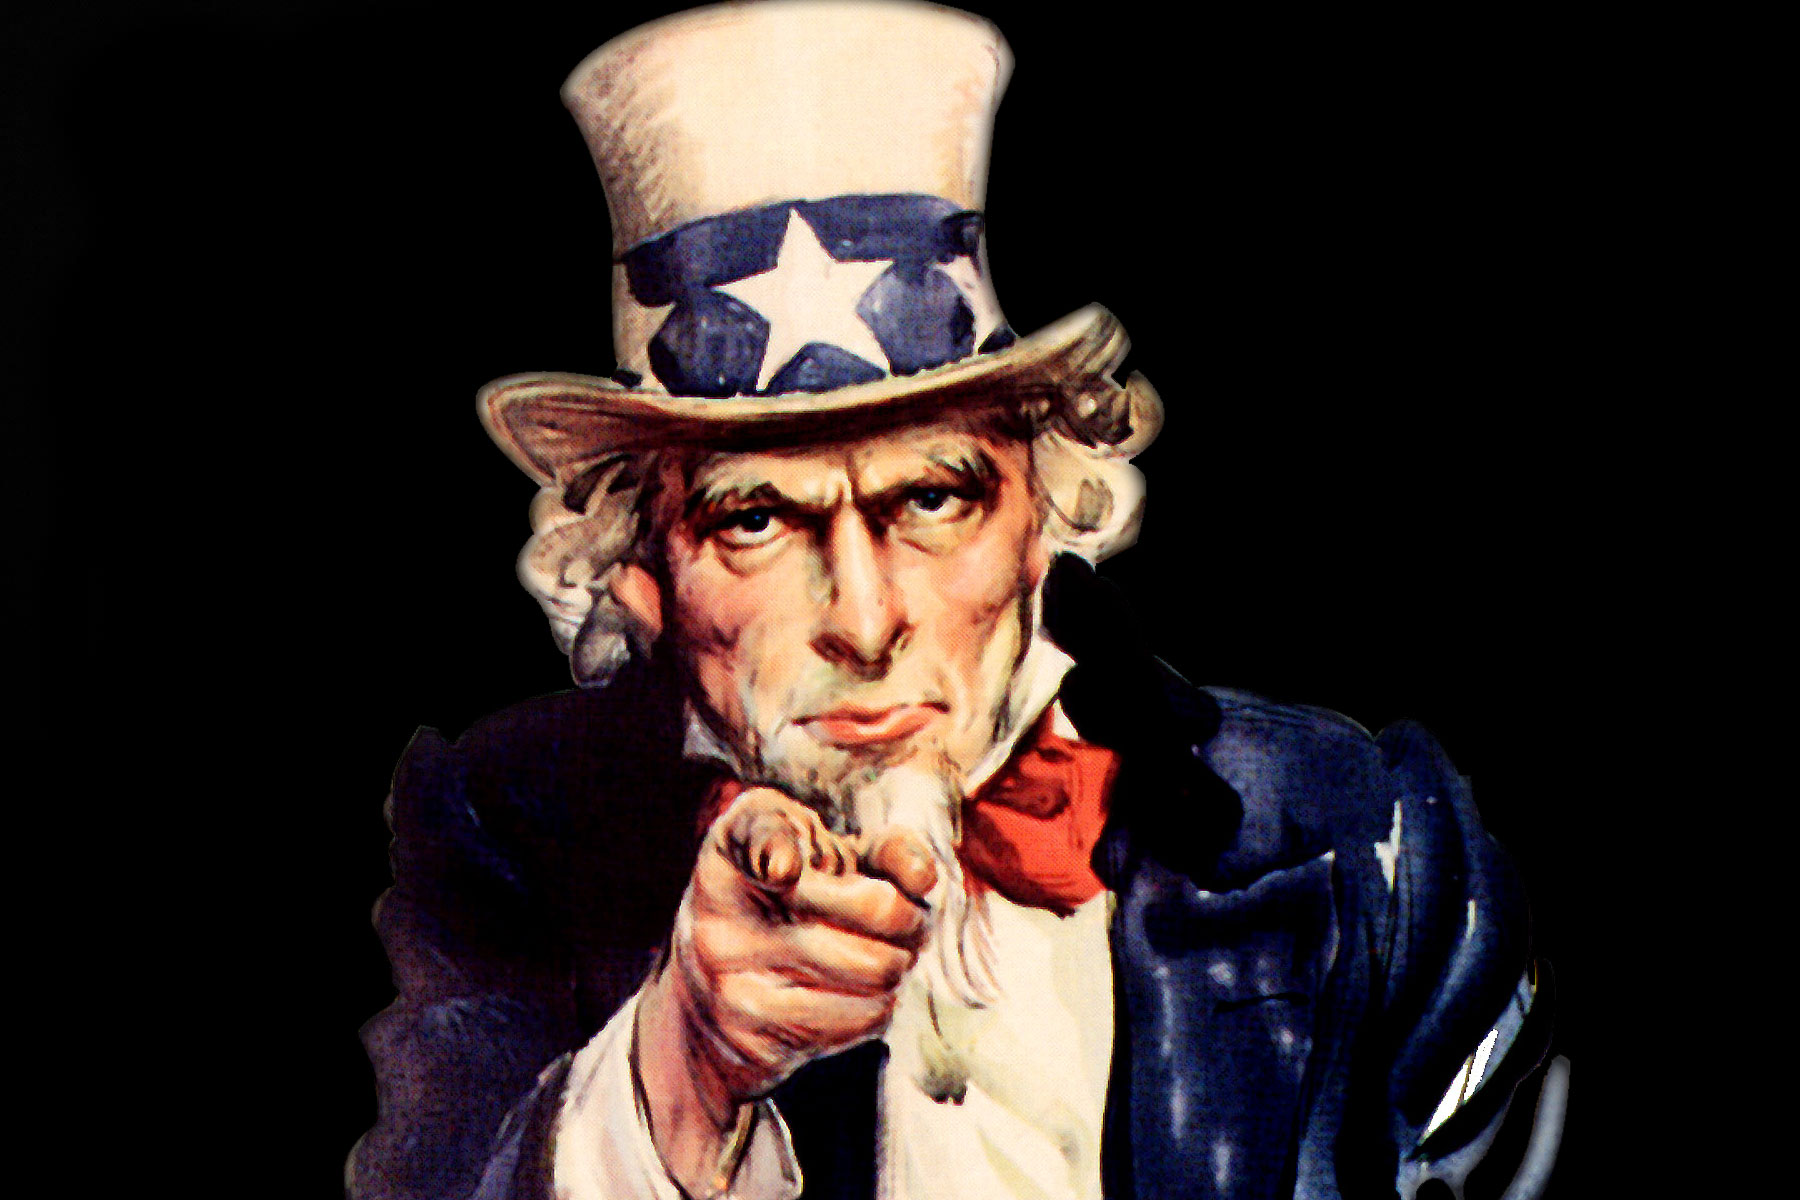 We Want You to Contribute